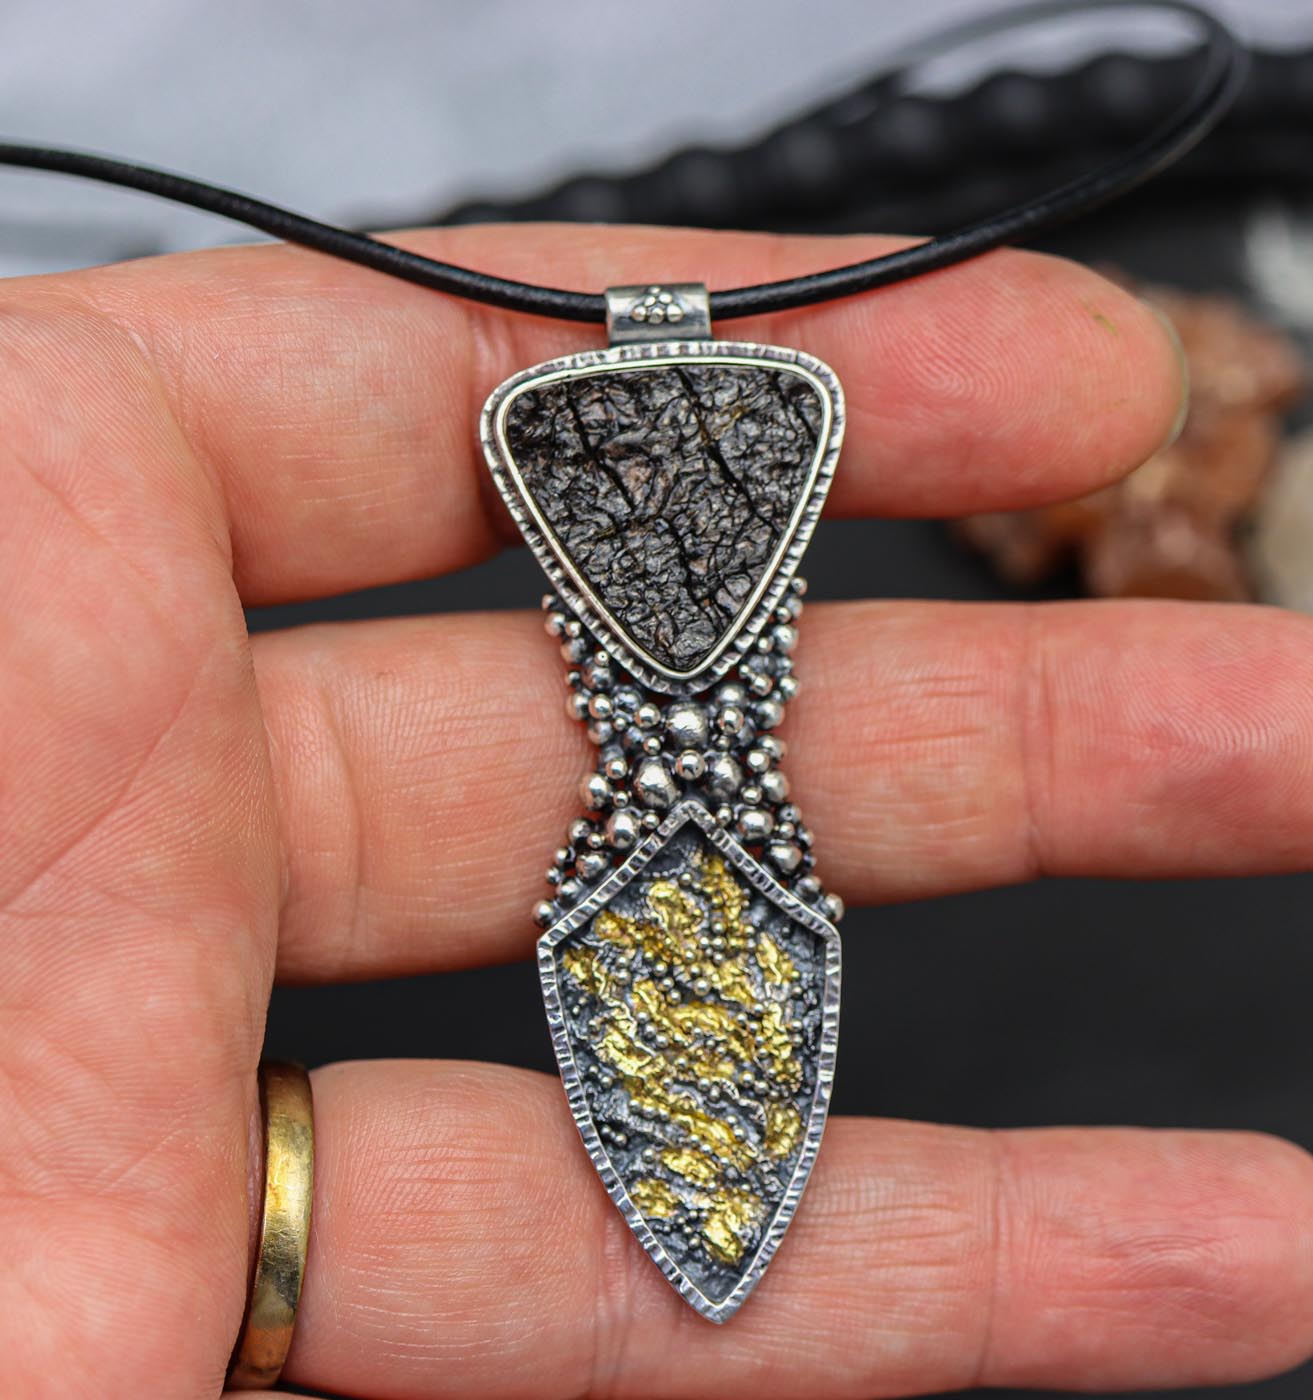 The Goddess Pendant #2 Obsidian Necklace Sterling Silver and 22k Gold